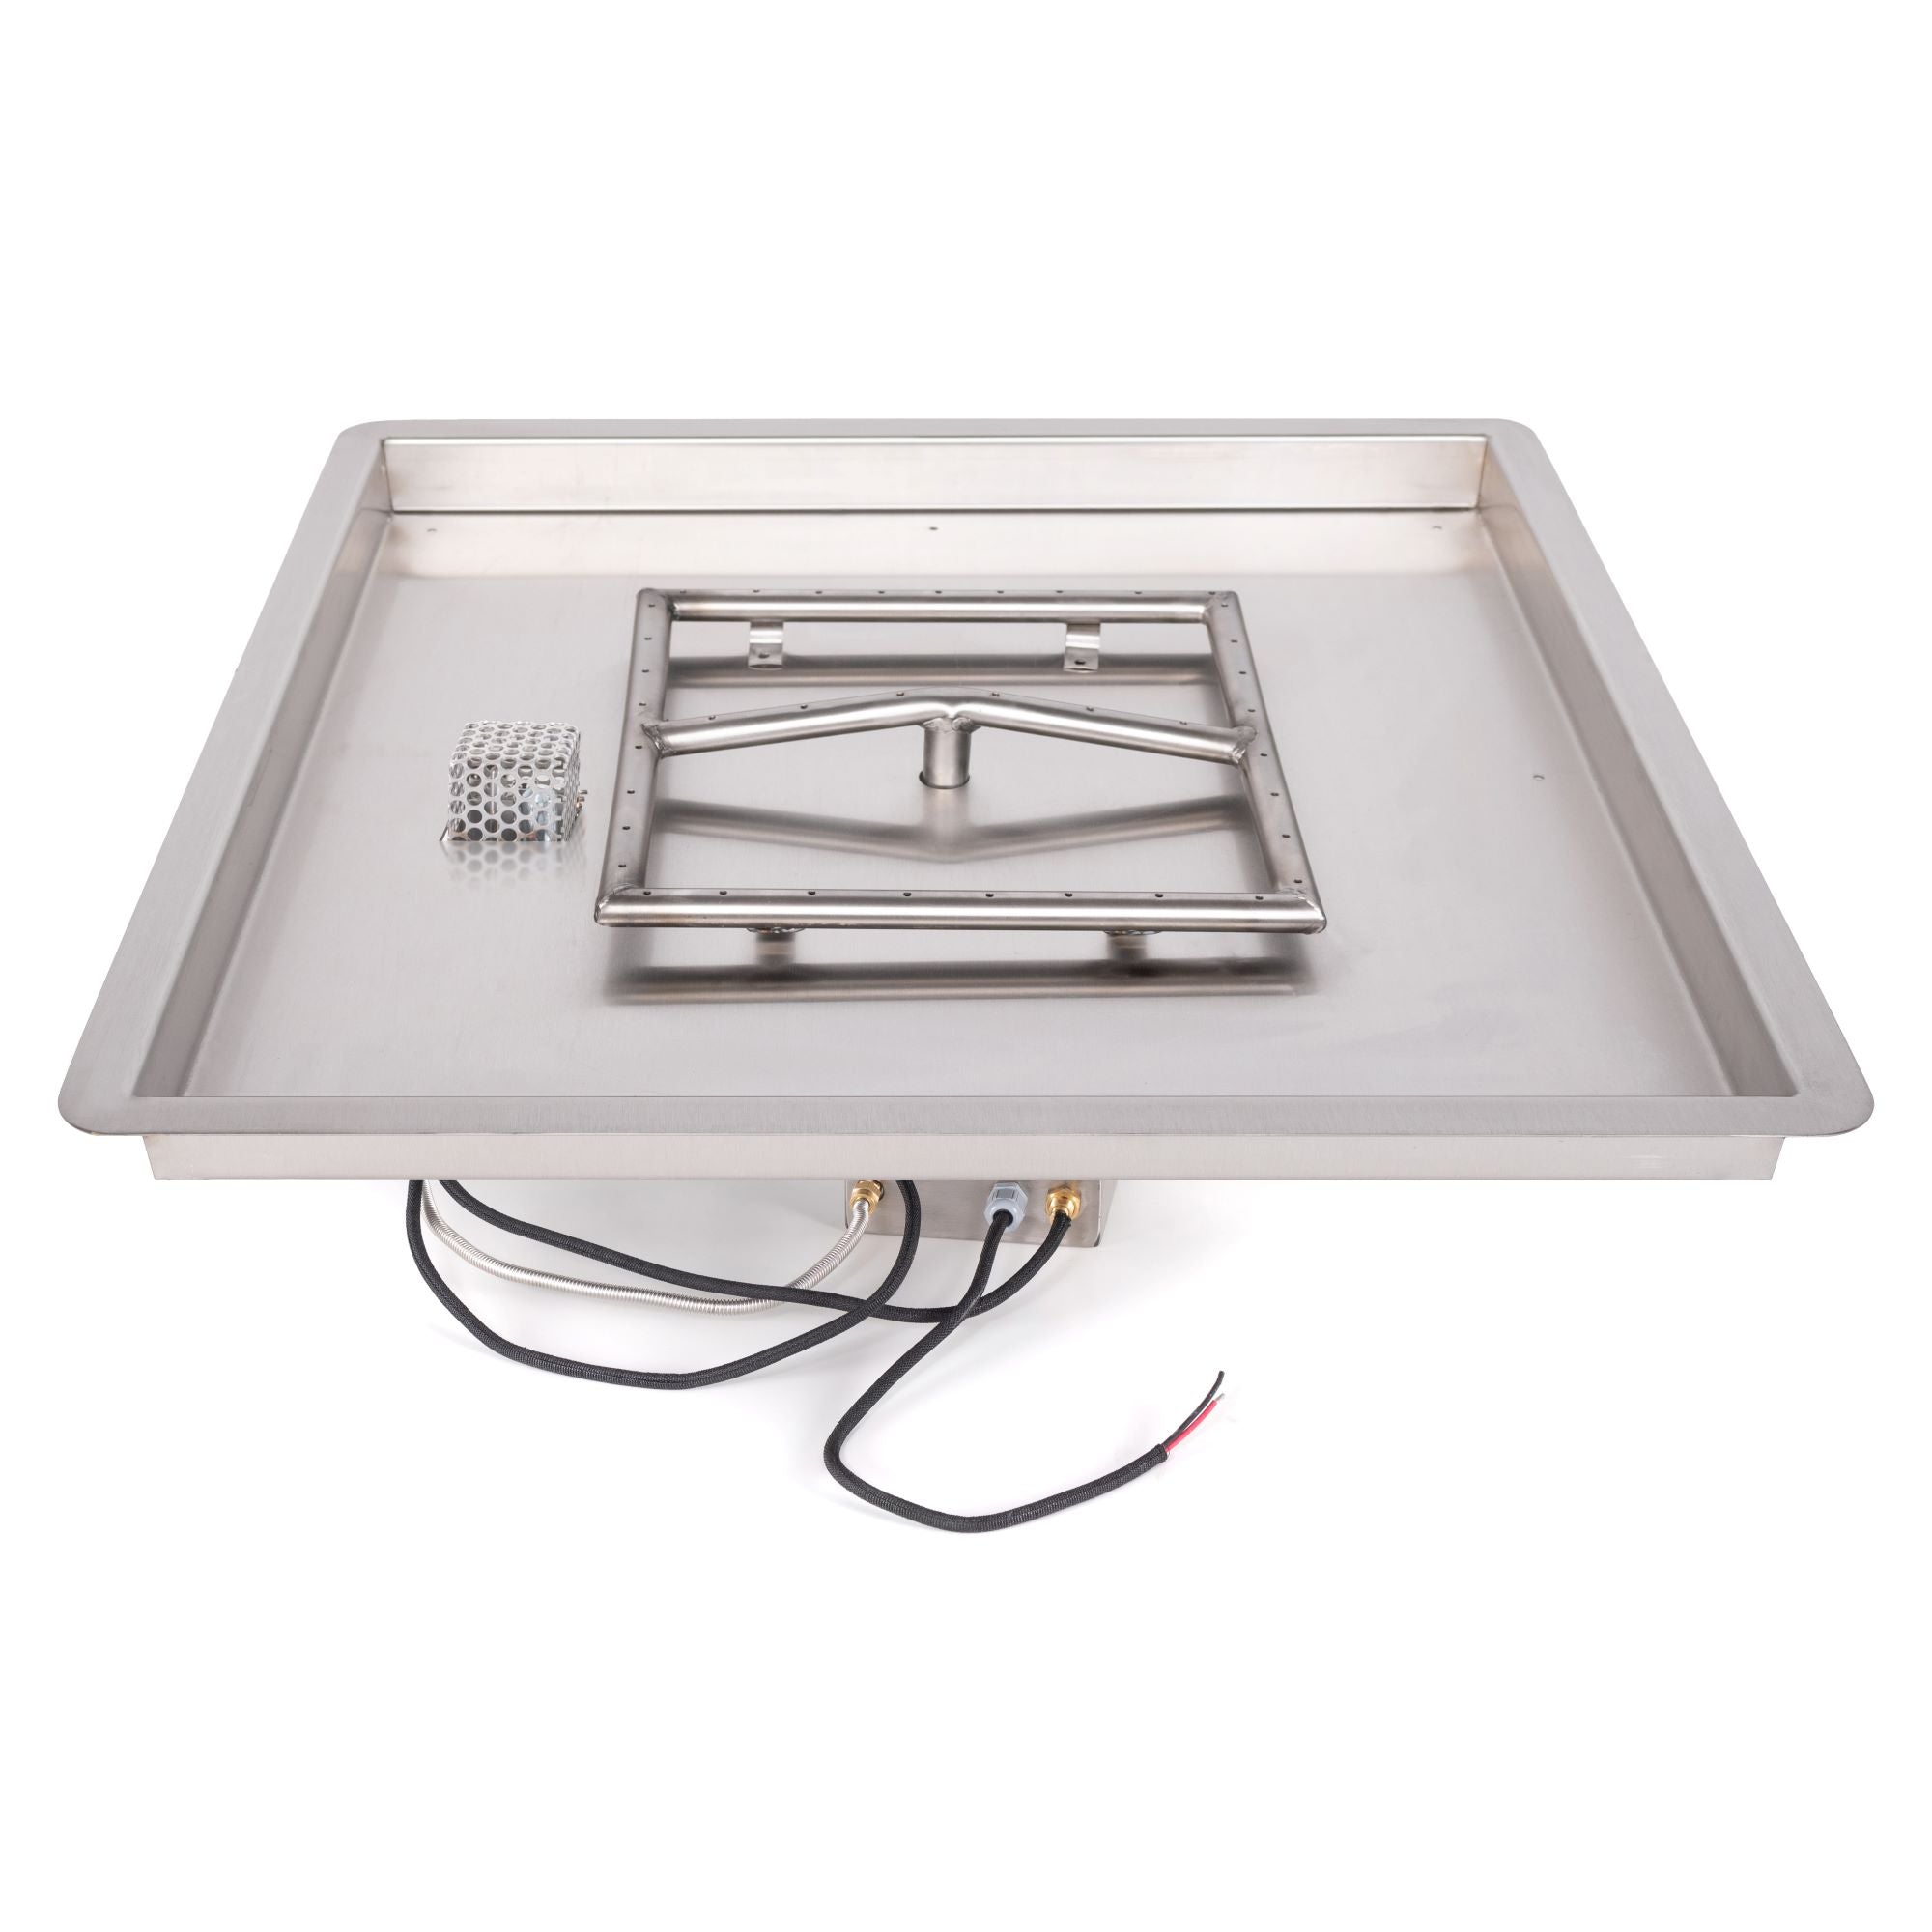 The Outdoor Plus Square Drop-in Pan with Stainless Steel Burner